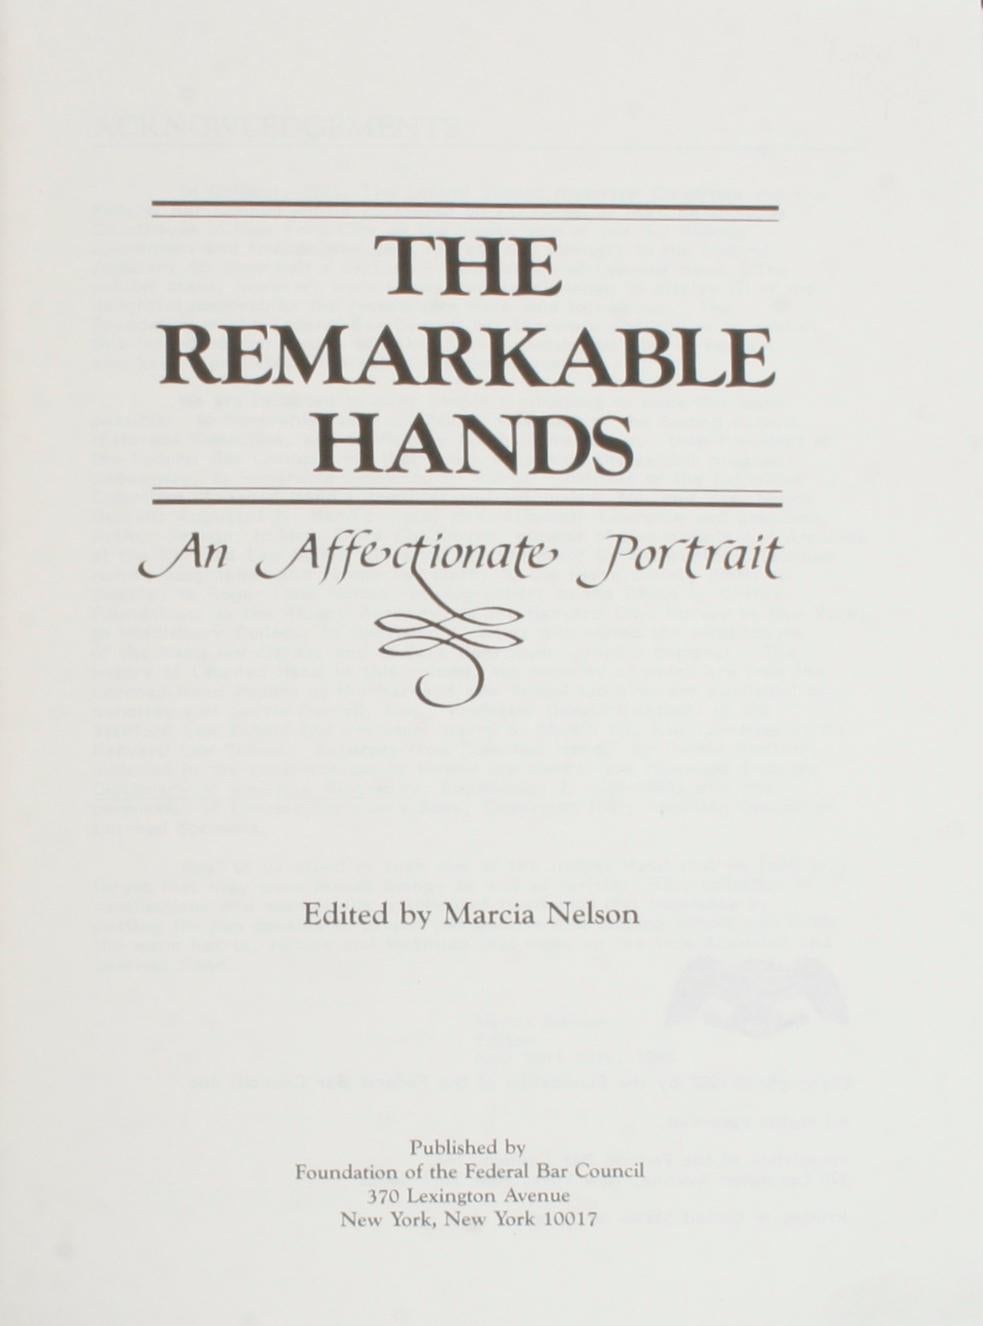 The Remarkable Hands, An Affectionate Portrait. New York: Foundation of the Federal Bar Council, 1983. Limited edition hardcover with glassine overlay. 199 pp. A scarce biography of cousins Augustus and Learned Hand who served together on the United